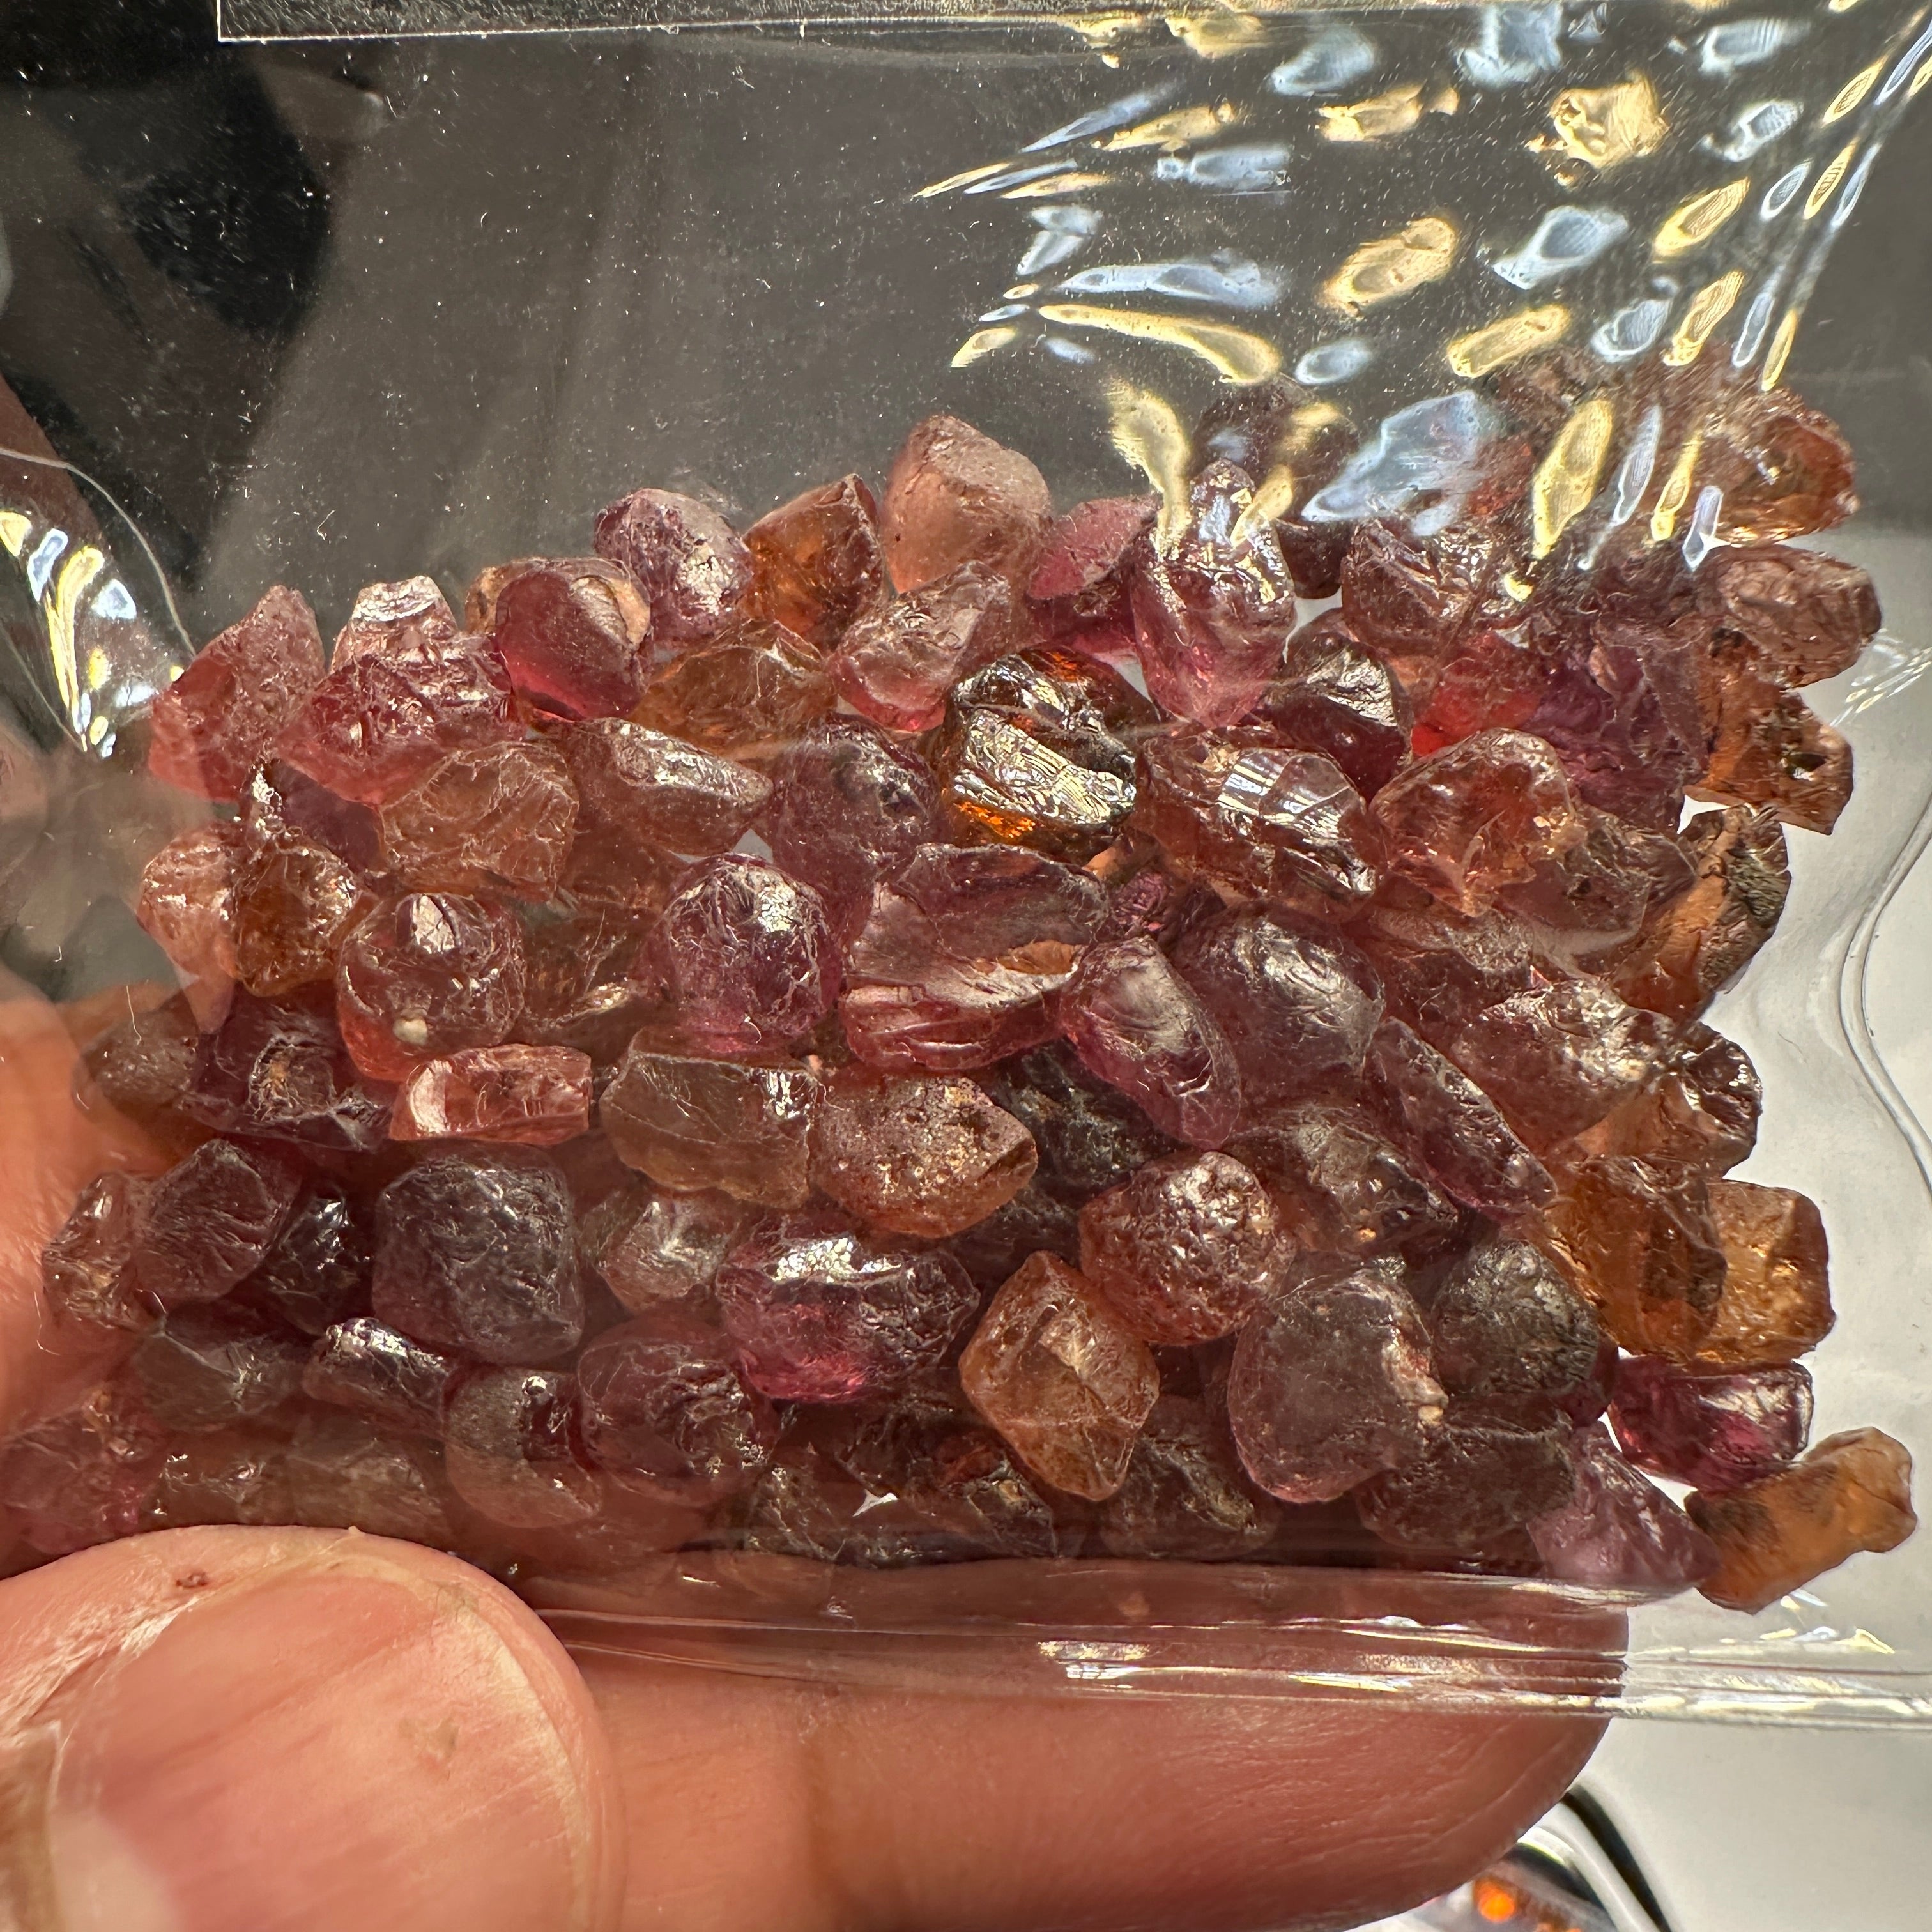 166.96ct Mixed Garnet Lot, Tanzania, Untreated Unheated, slightly included to included